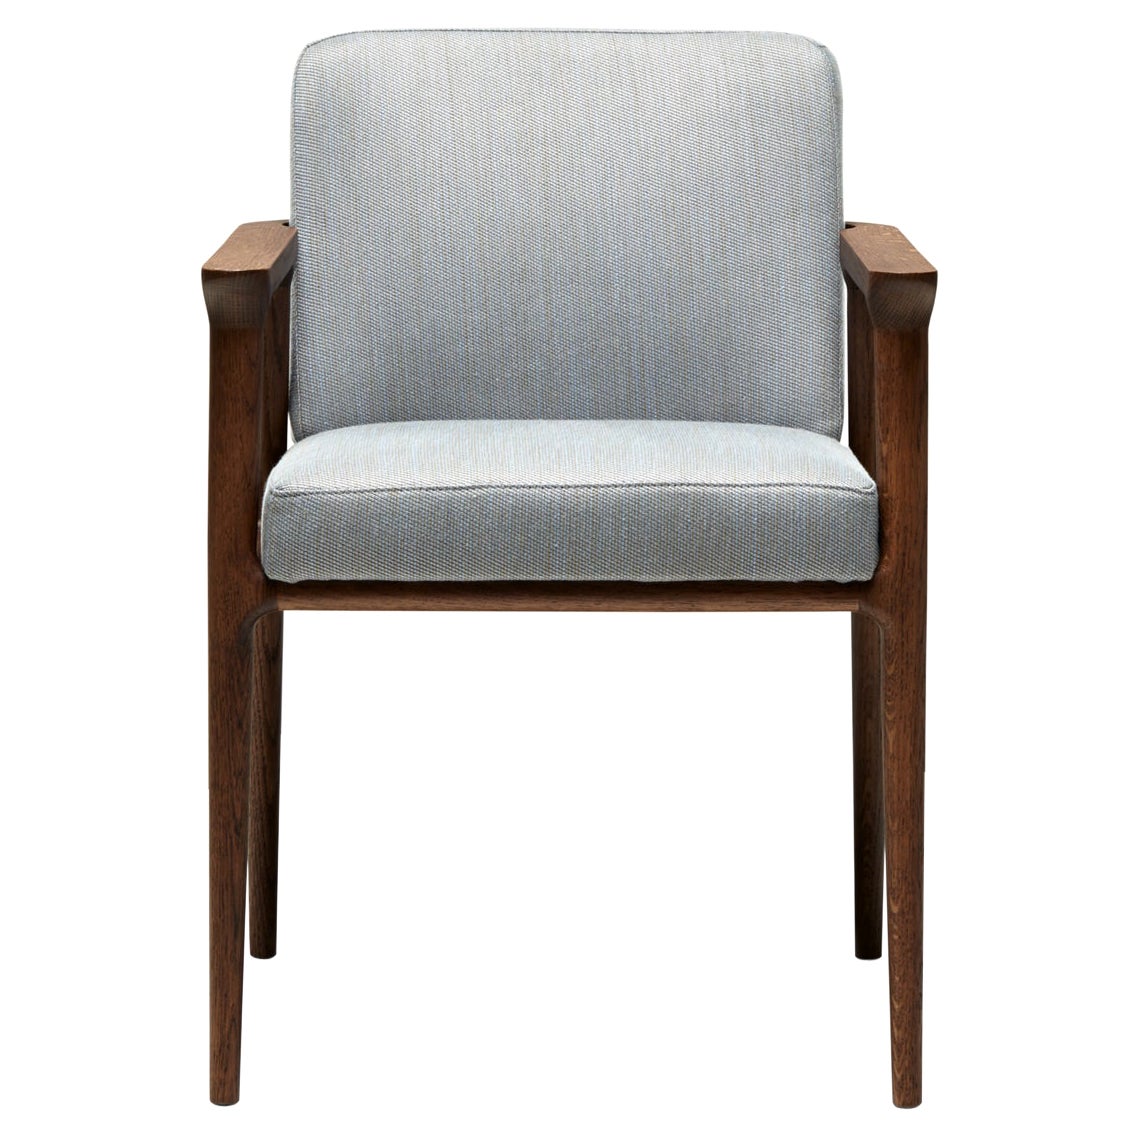 Moooi Zio Dining Chair in Griffin Upholstery with Oak Stained Cinnamon Frame